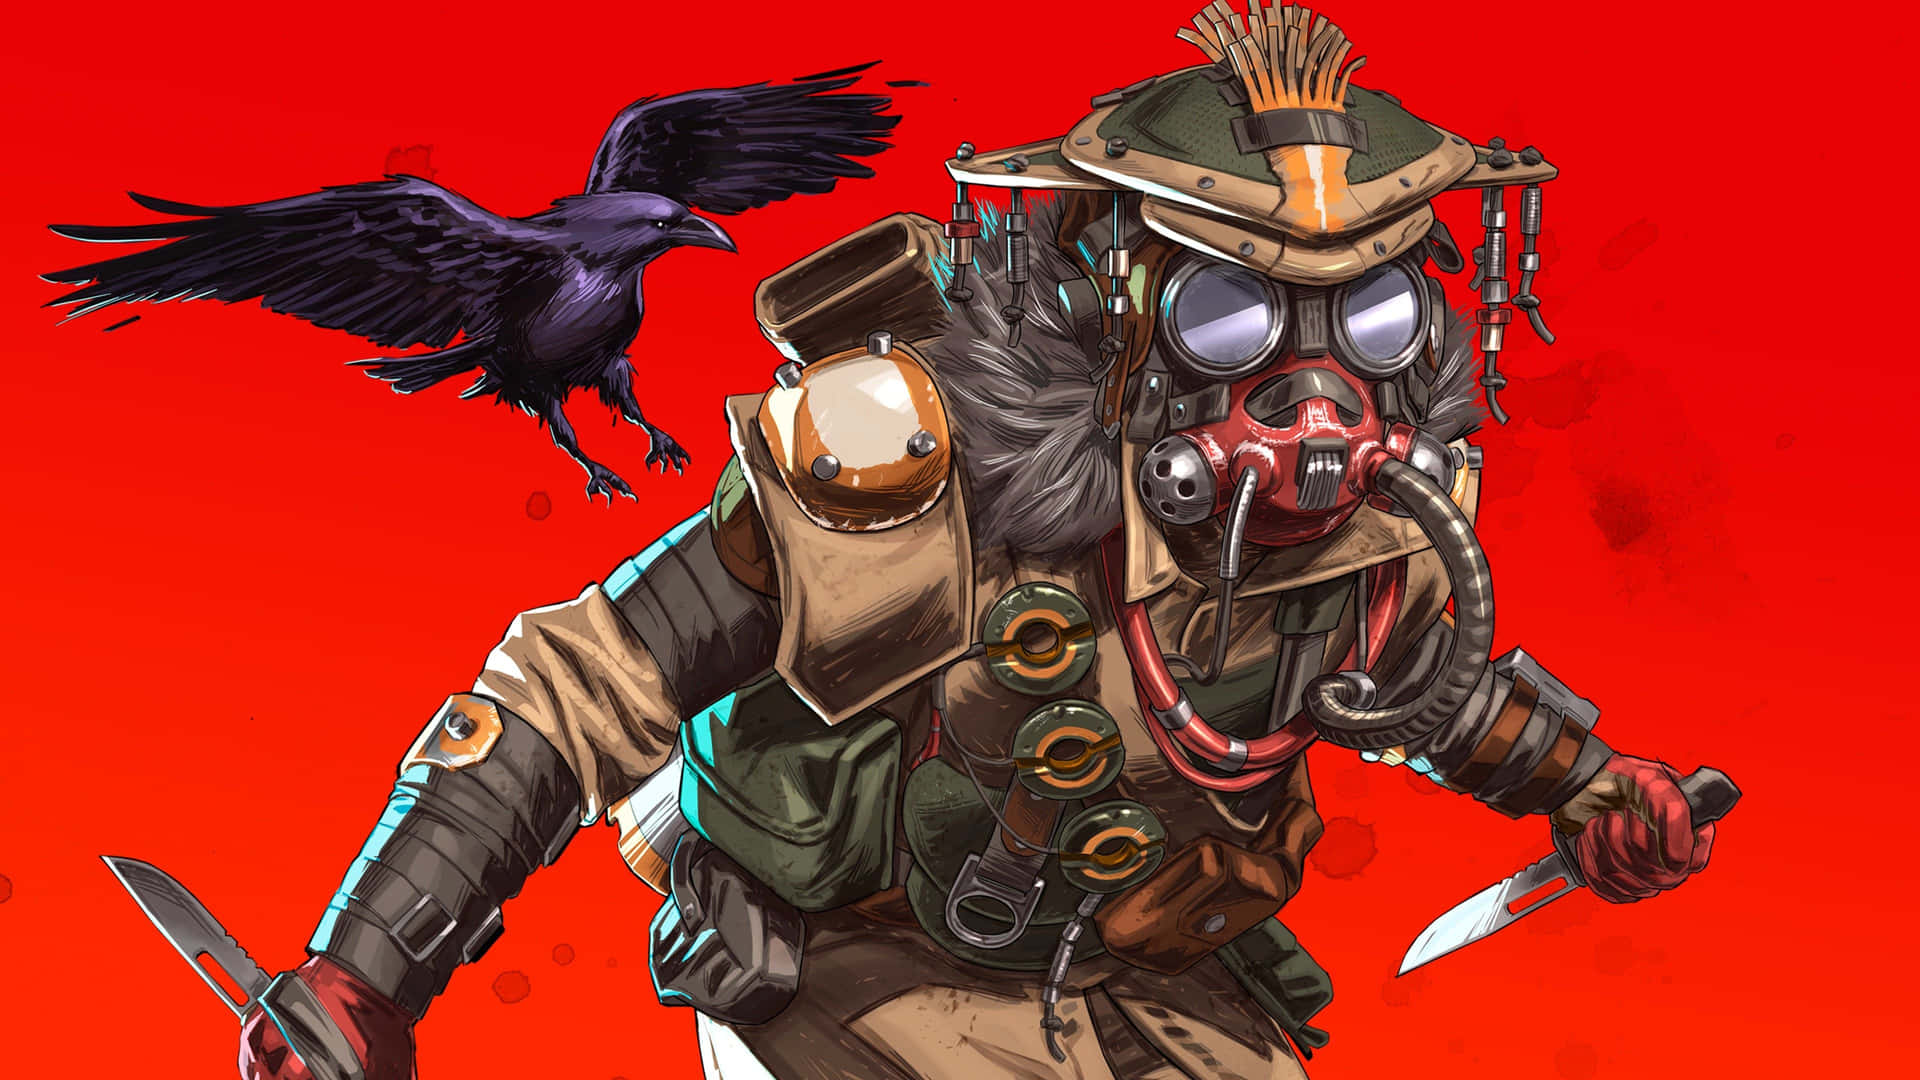 Secure the Apex Legends victory with Bloodhound Wallpaper